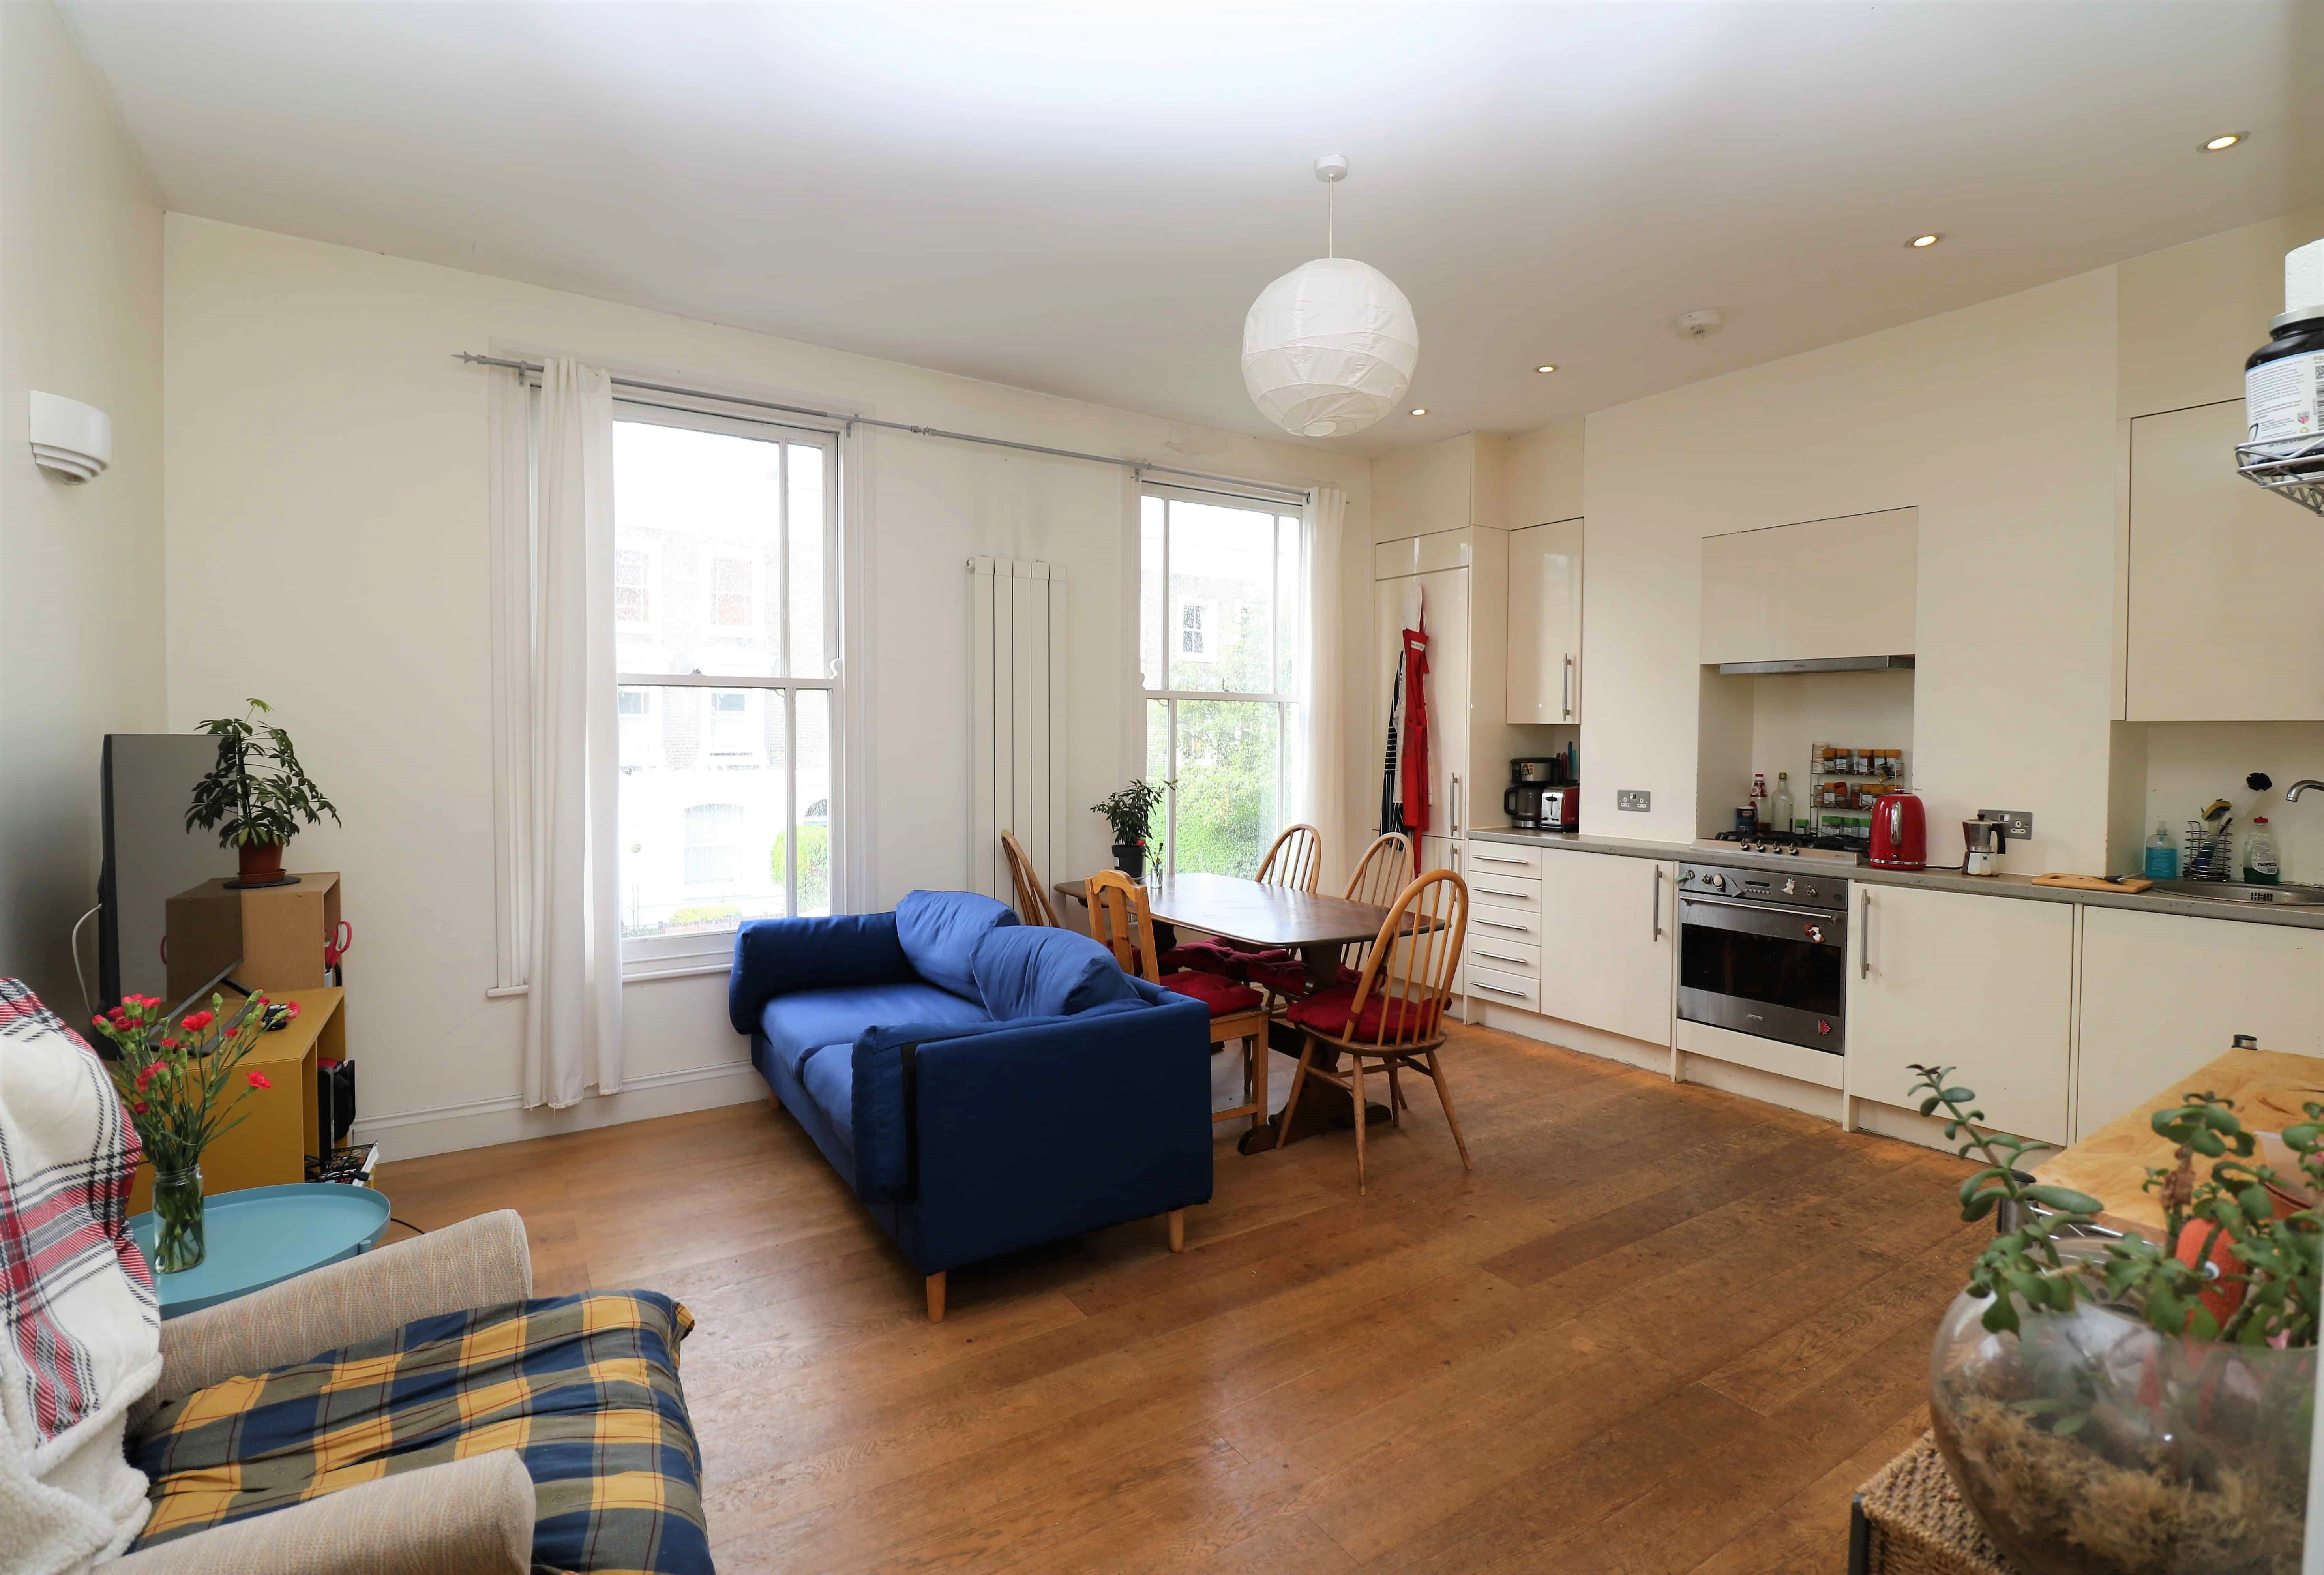 Spacious split level 3 double bedroom flat in N4 Islington with a superb roof terrace